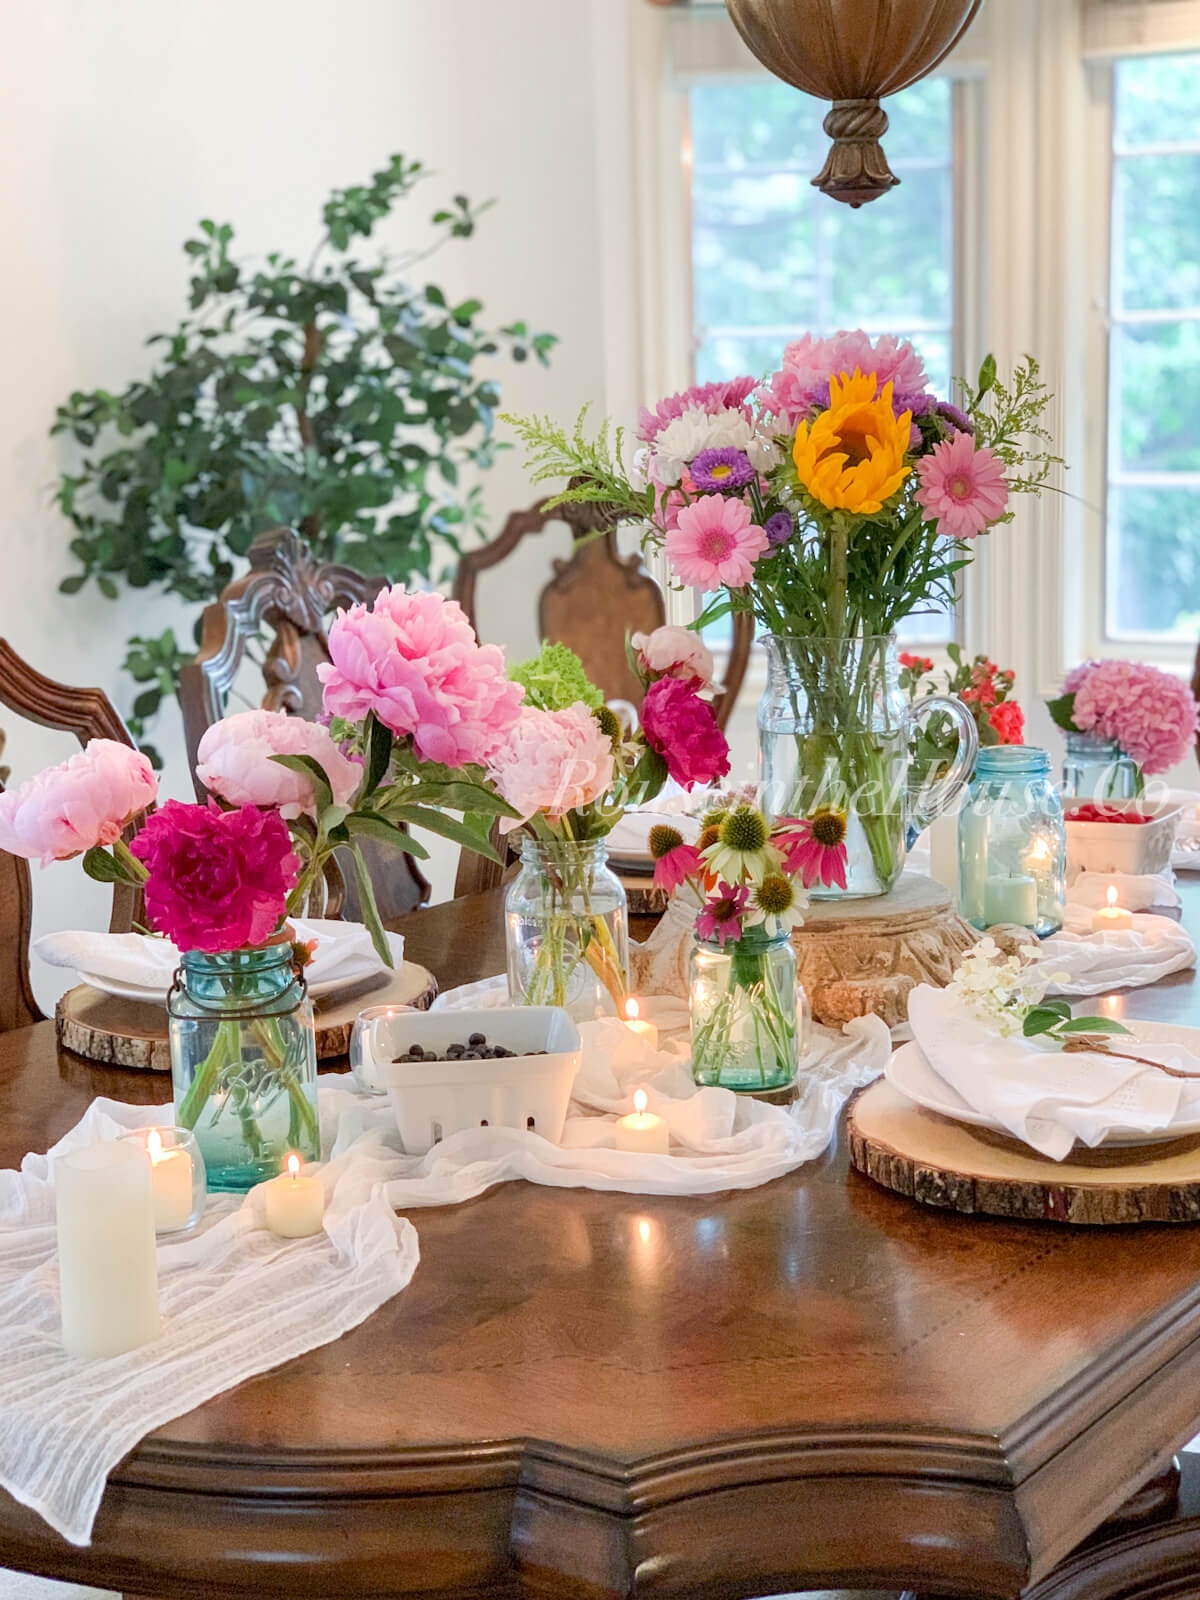 A white muslin table runner is draped over a wood table top. Peony, hydrangea, coneflower and mixed flower arrangements in mason jars are along the runner. A large arrangement in a country pitcher is on a distressed pedestal in the center of the table.